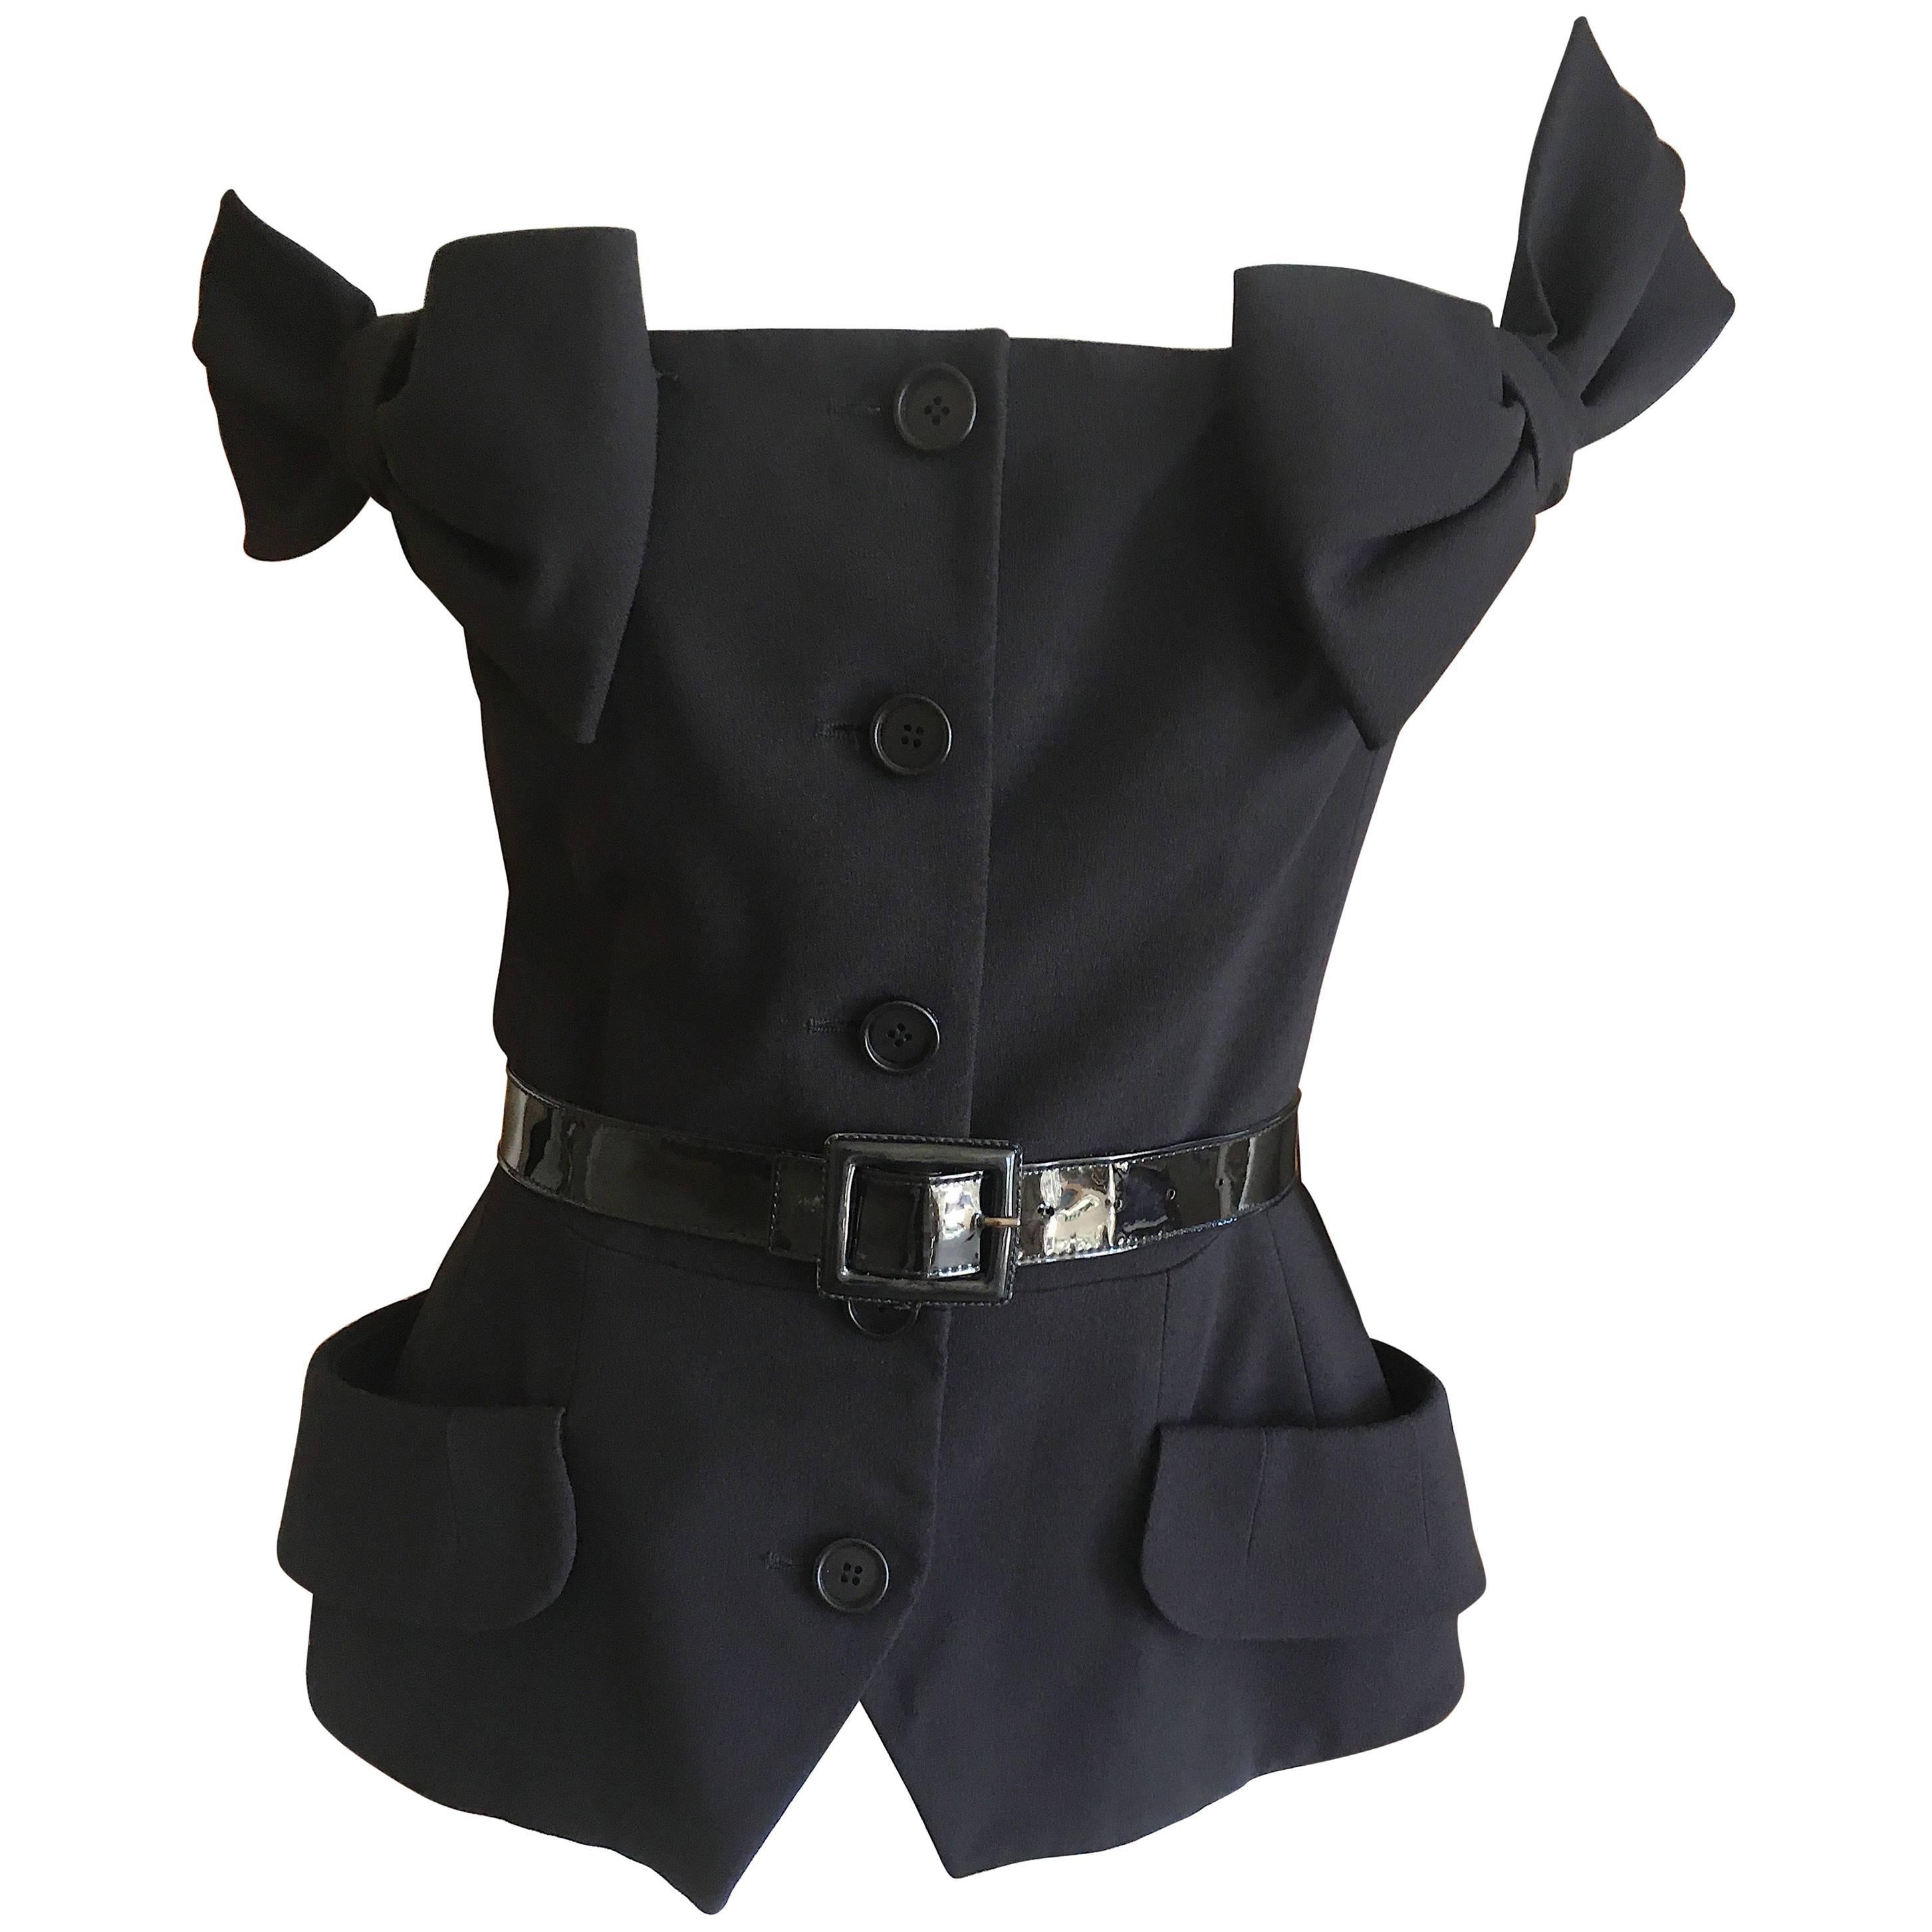 Christian Dior by John Galliano 2011 Black Off the Shoulder Jacket with Bows